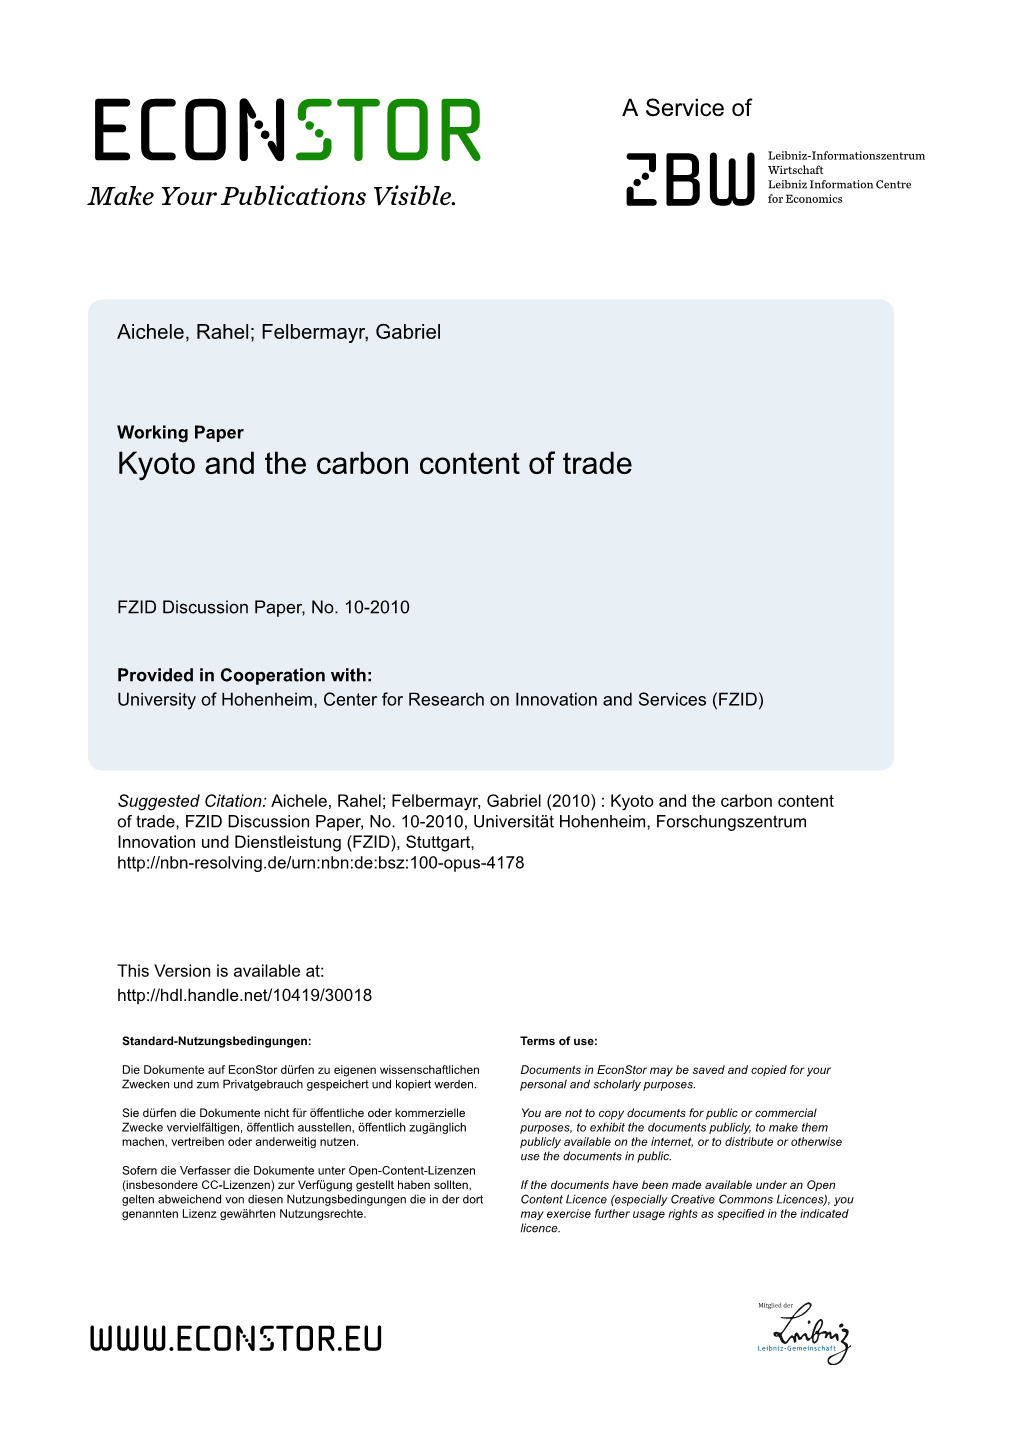 Kyoto and the Carbon Content of Trade